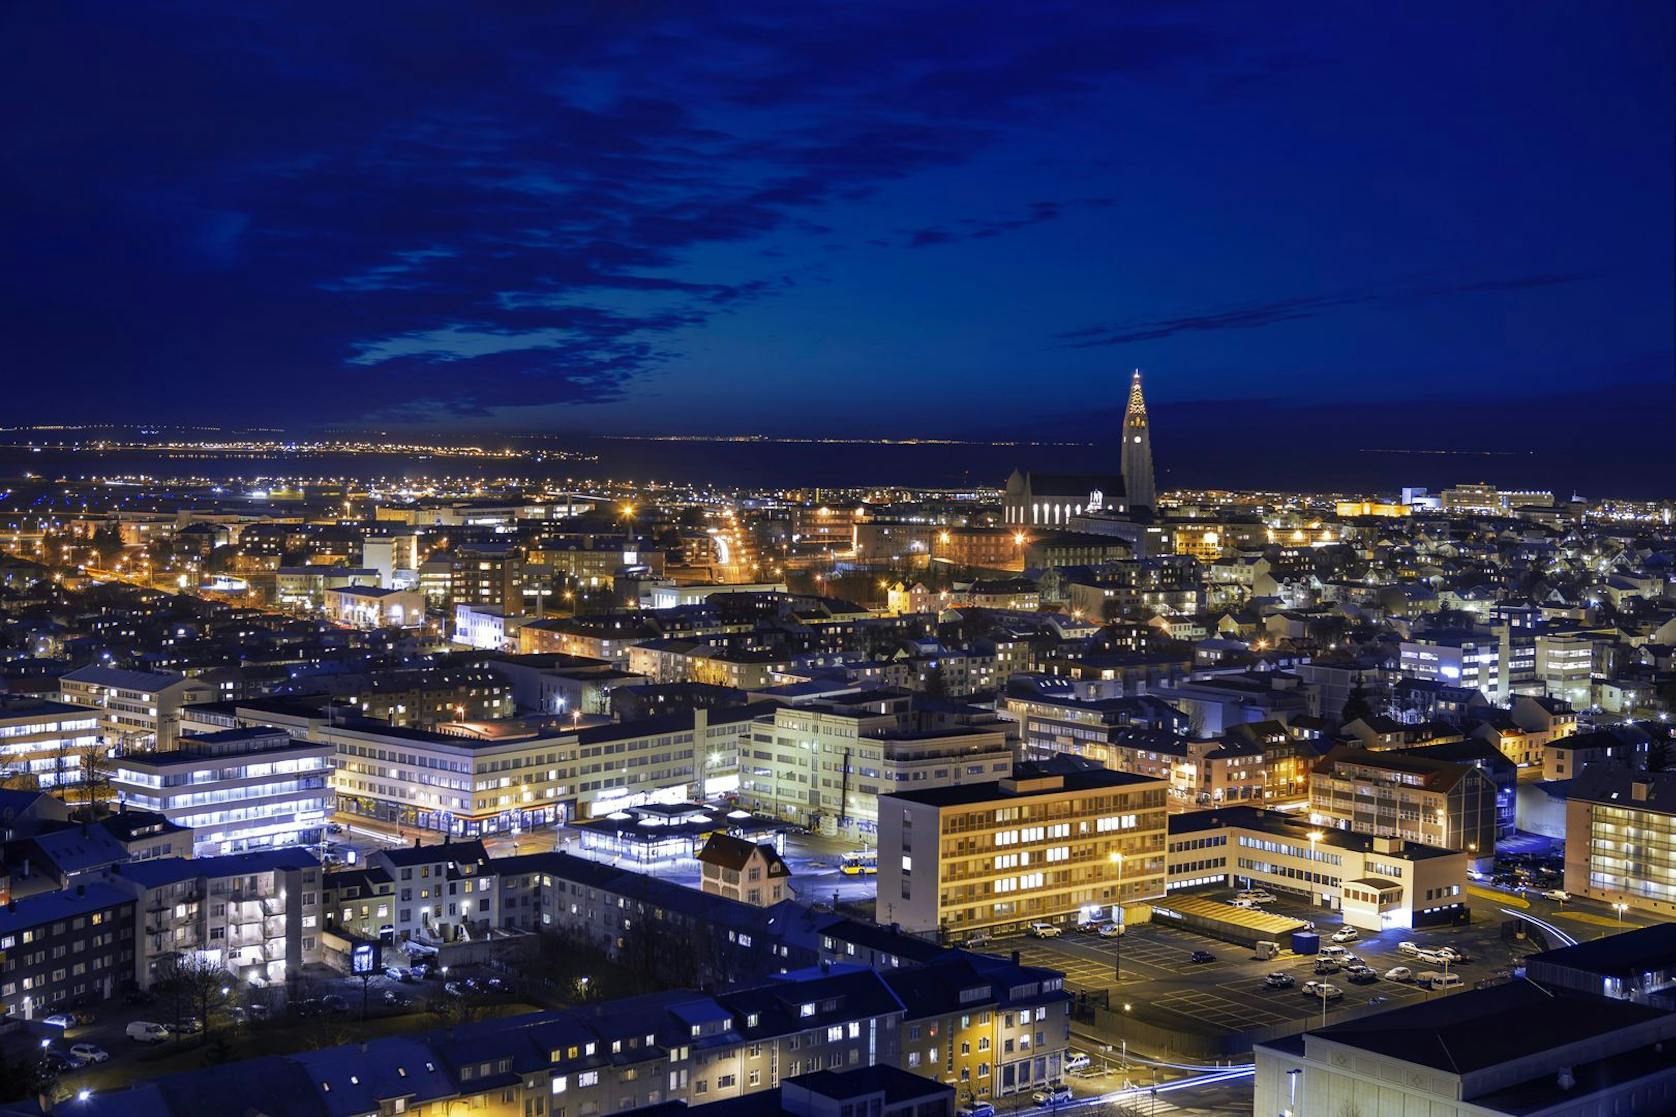 Iceland Can Complete the Energy Transition - The National Power Company ...